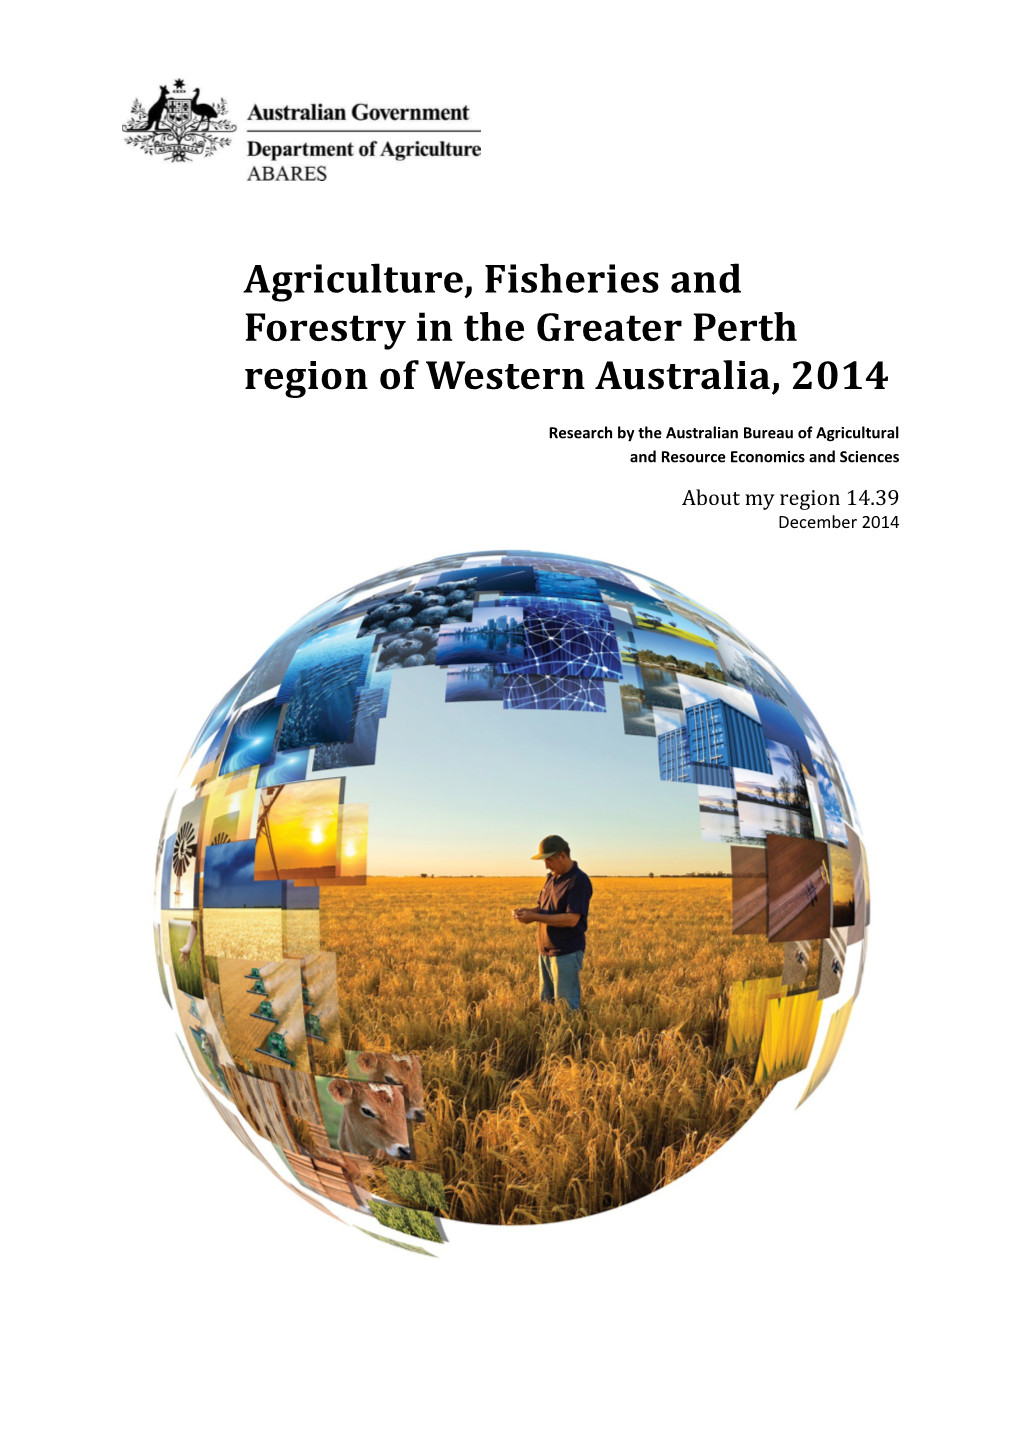 Agriculture, Fisheries and Forestry in the Greater Perth Region of Western Australia, 2014